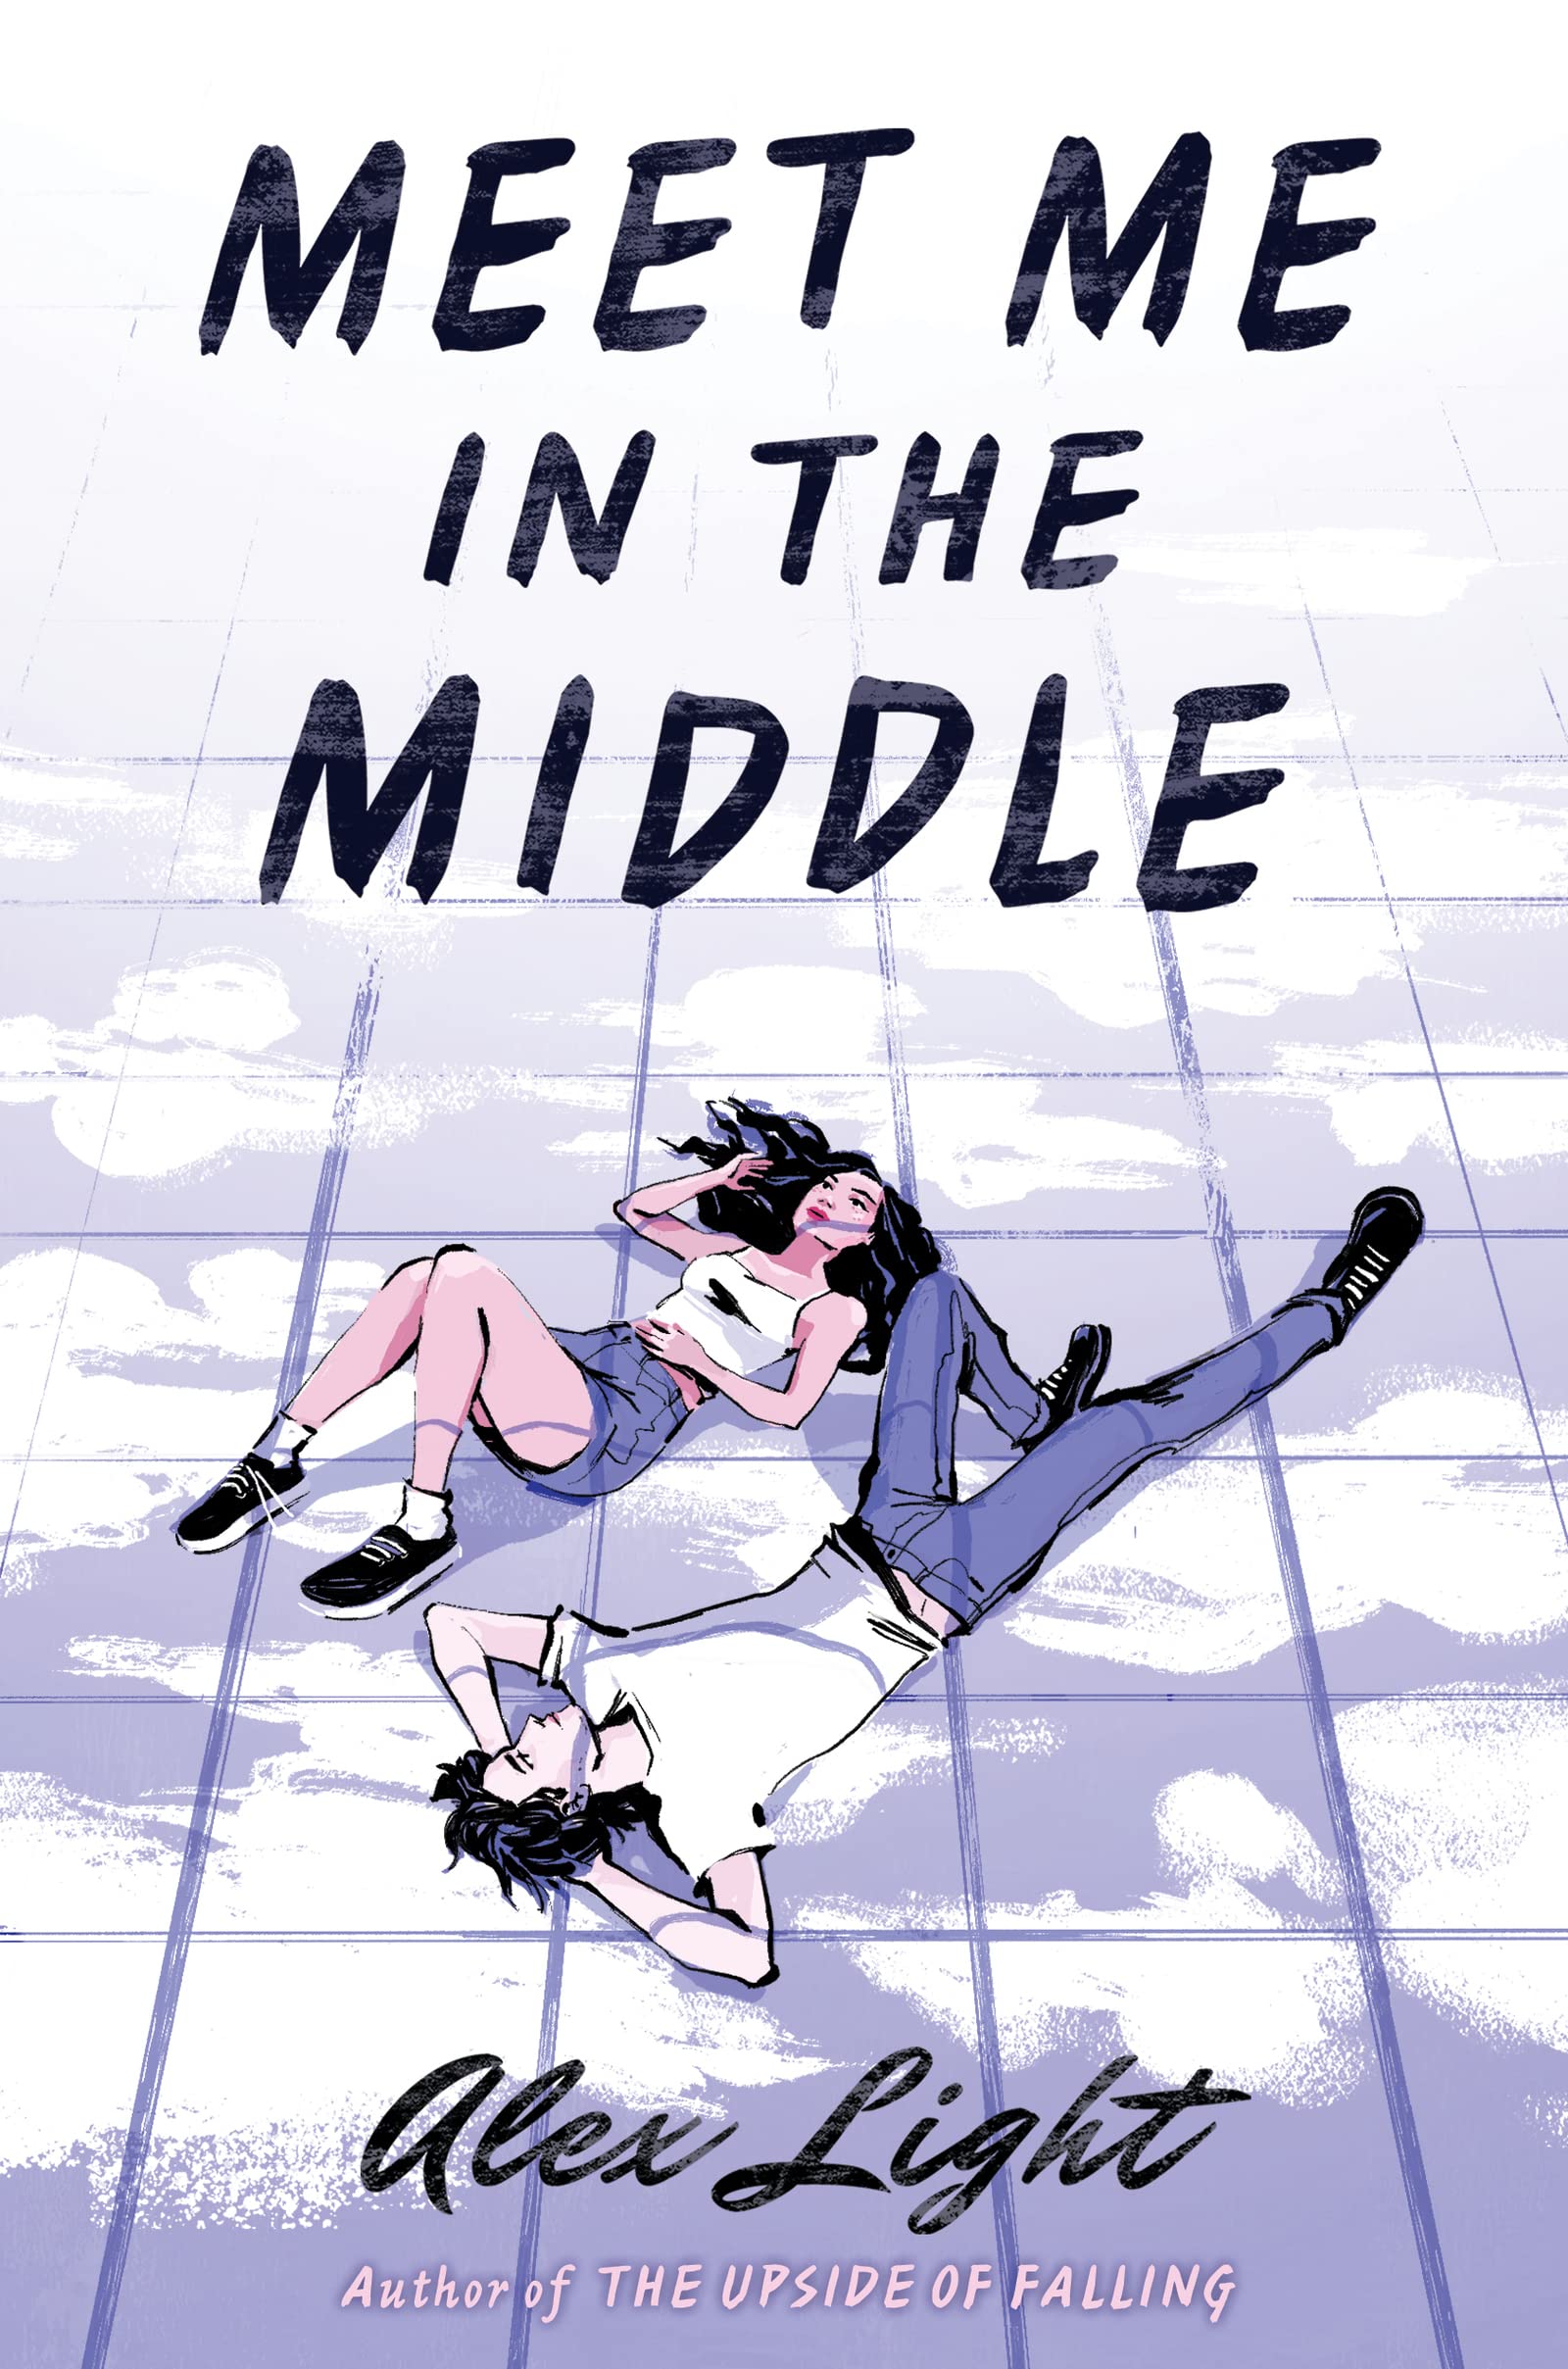 Image for "Meet Me in the Middle"